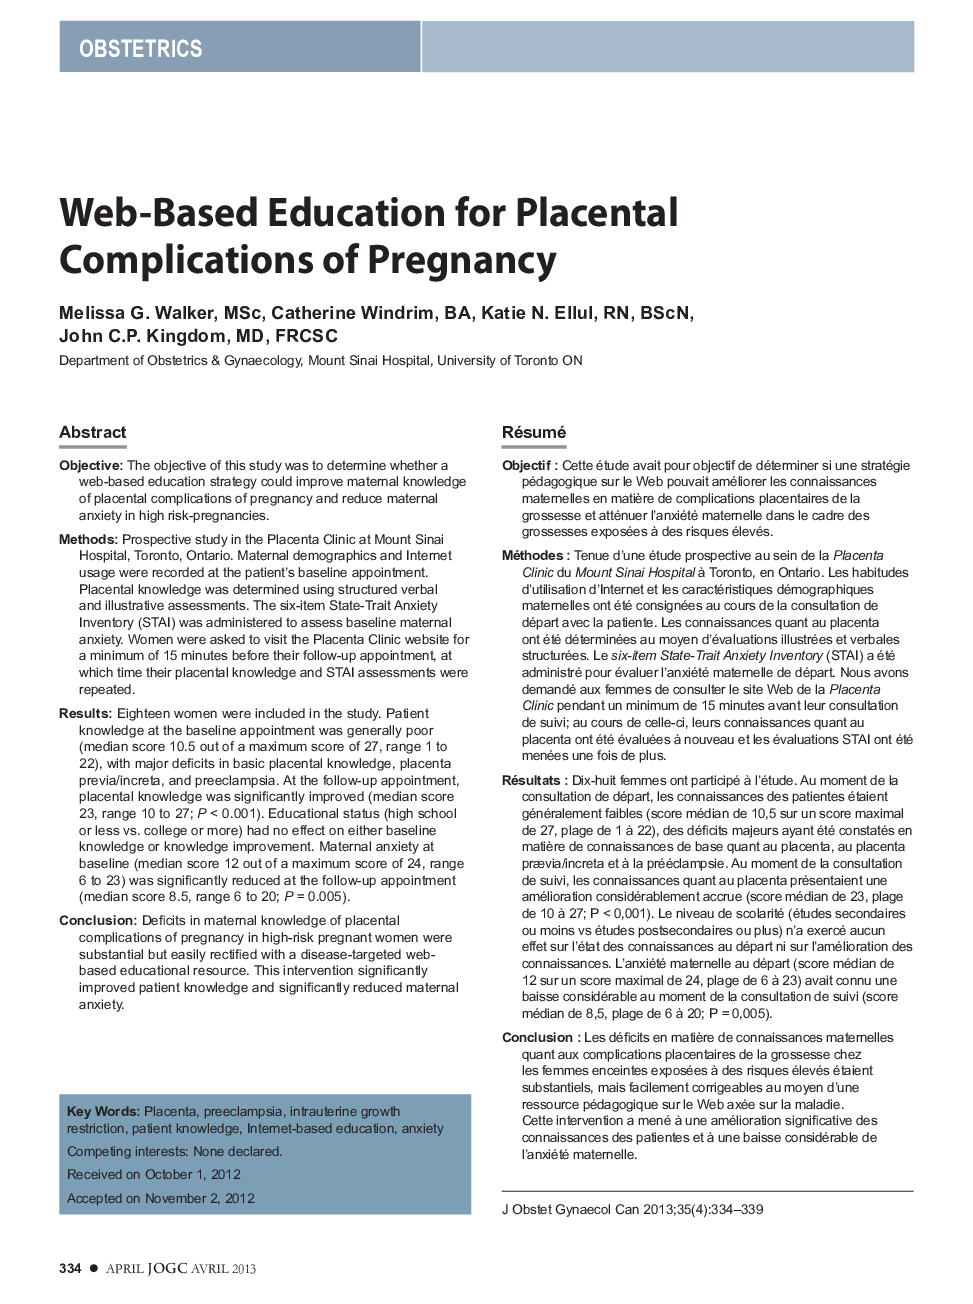 Web-Based Education for Placental Complications of Pregnancy